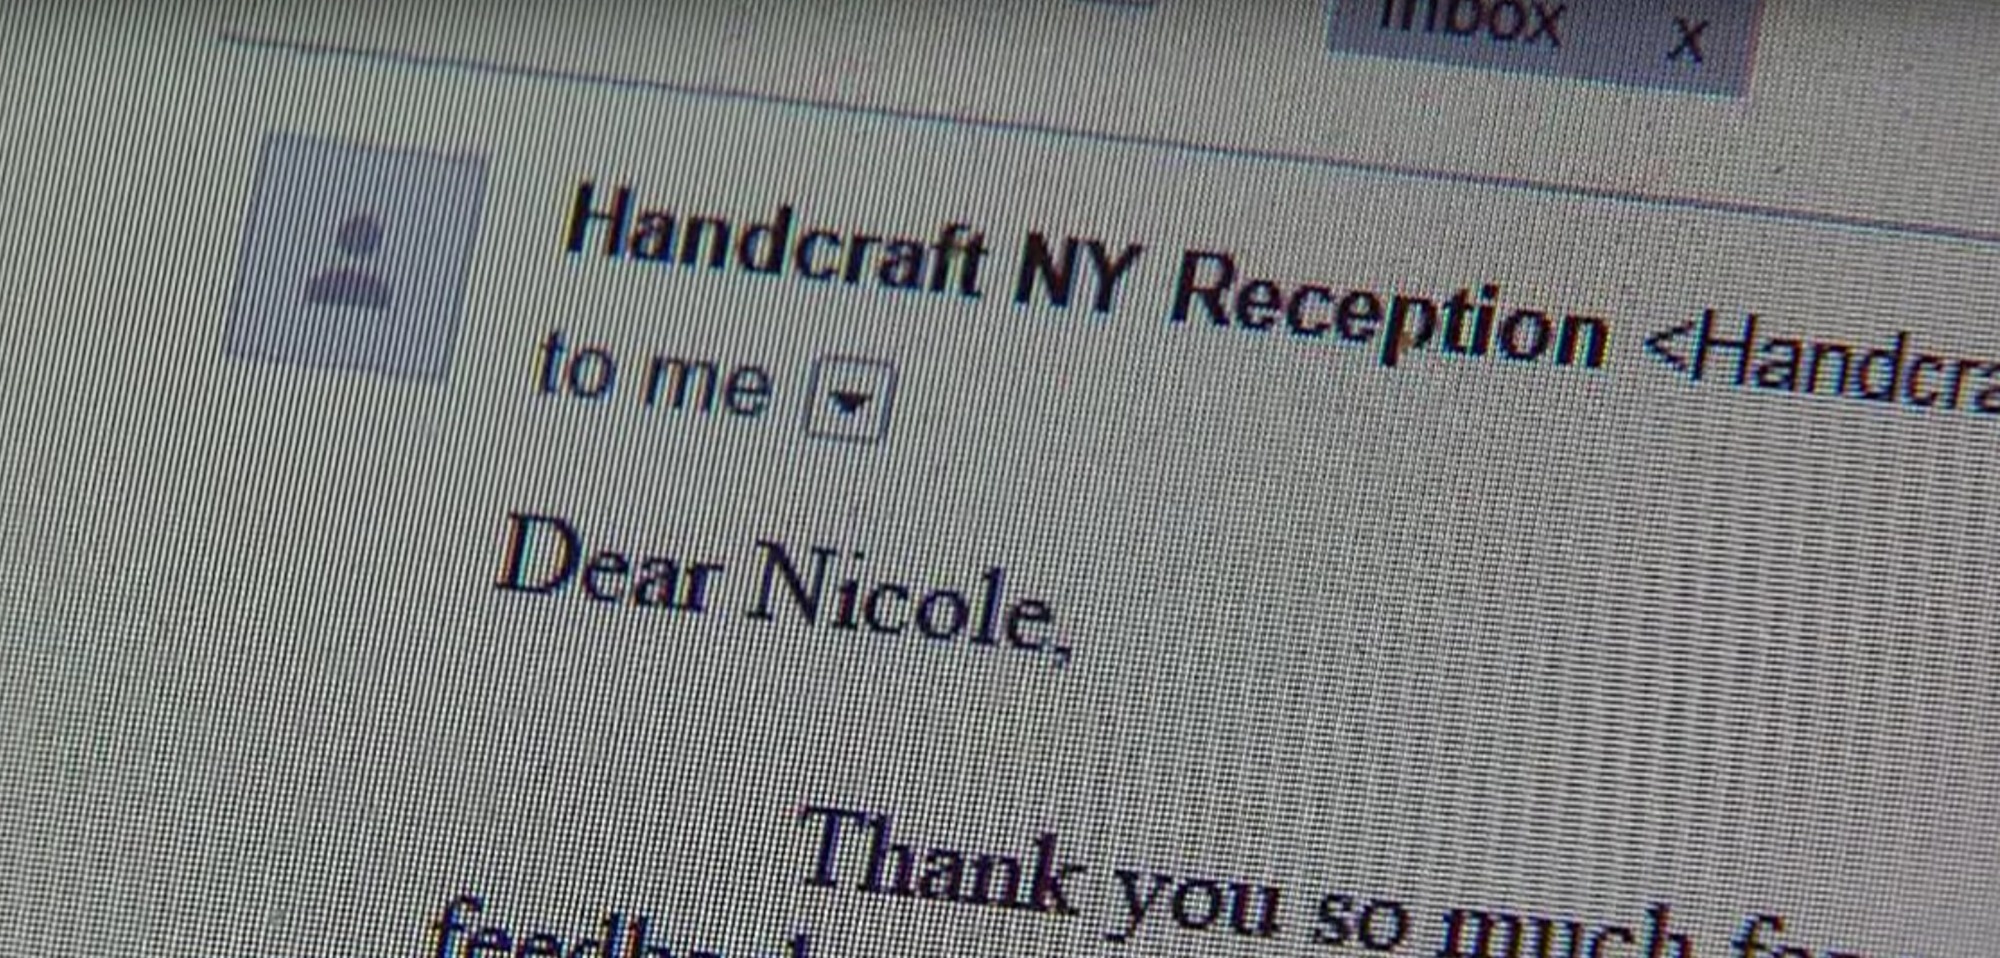 Nicole reached out to the company about the note.

She received a quick response. Handcraft apologized and told her that they'd send her a brand new pack of underwater. After being contacted by a news station, Mizrahi responded that the first step in investigating was figuring out which factory the underwear came from.